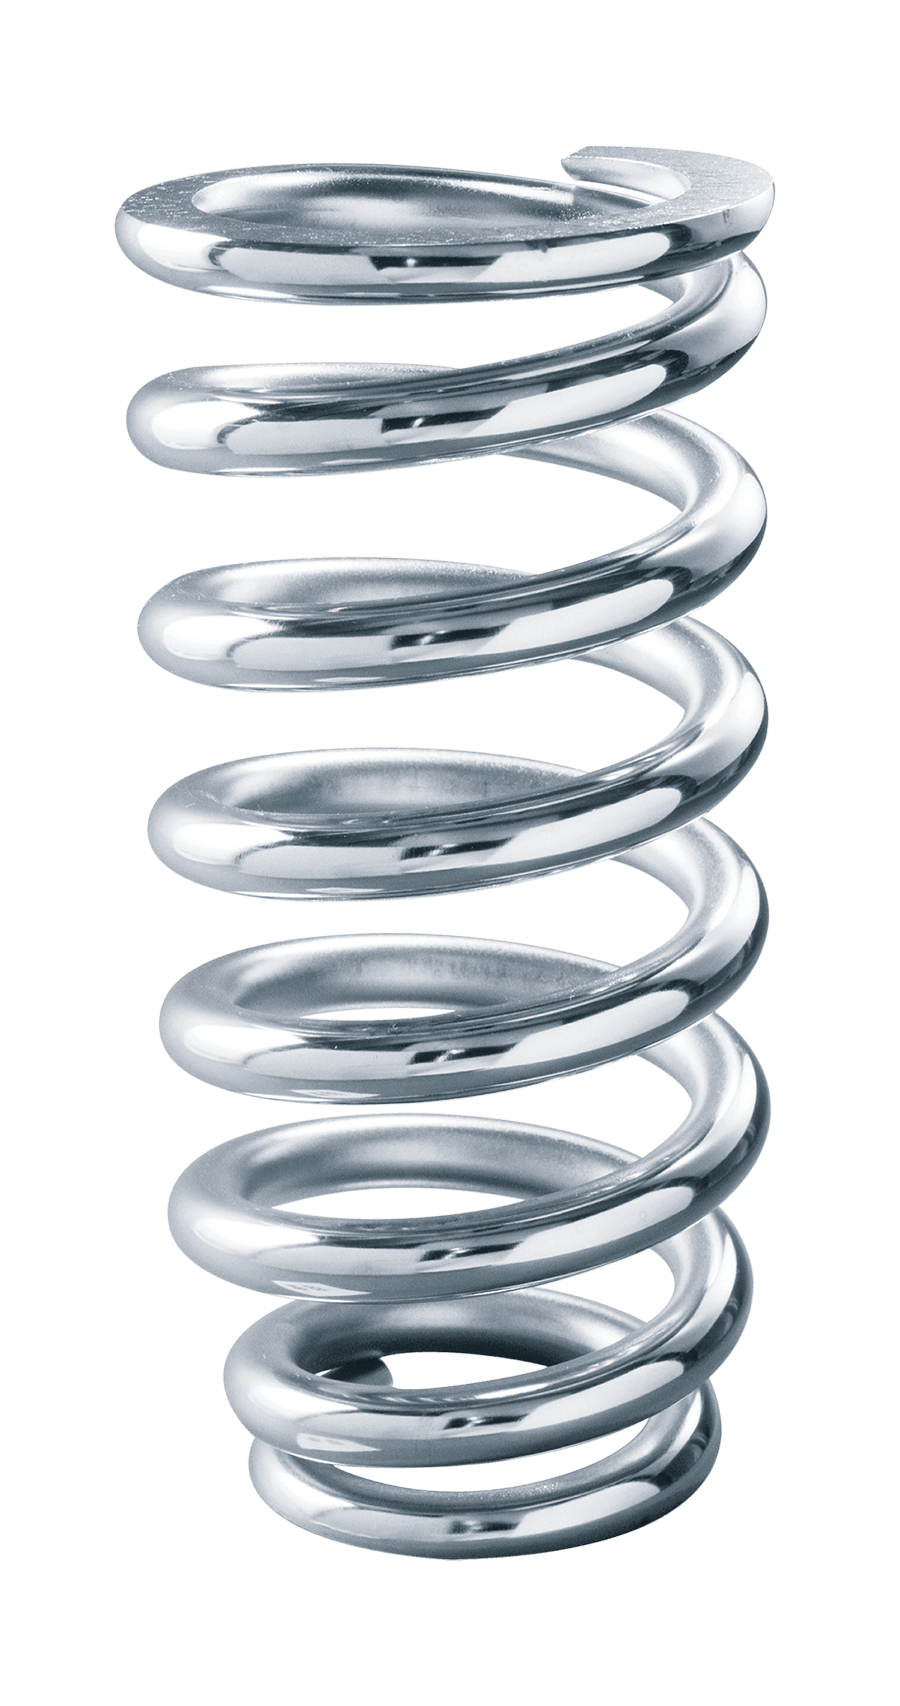 QA1 8MB600 Spring Chrome Silicon 3-1/2 Id 8-600 Lbs Chrome Plated 1St Coil Tapered